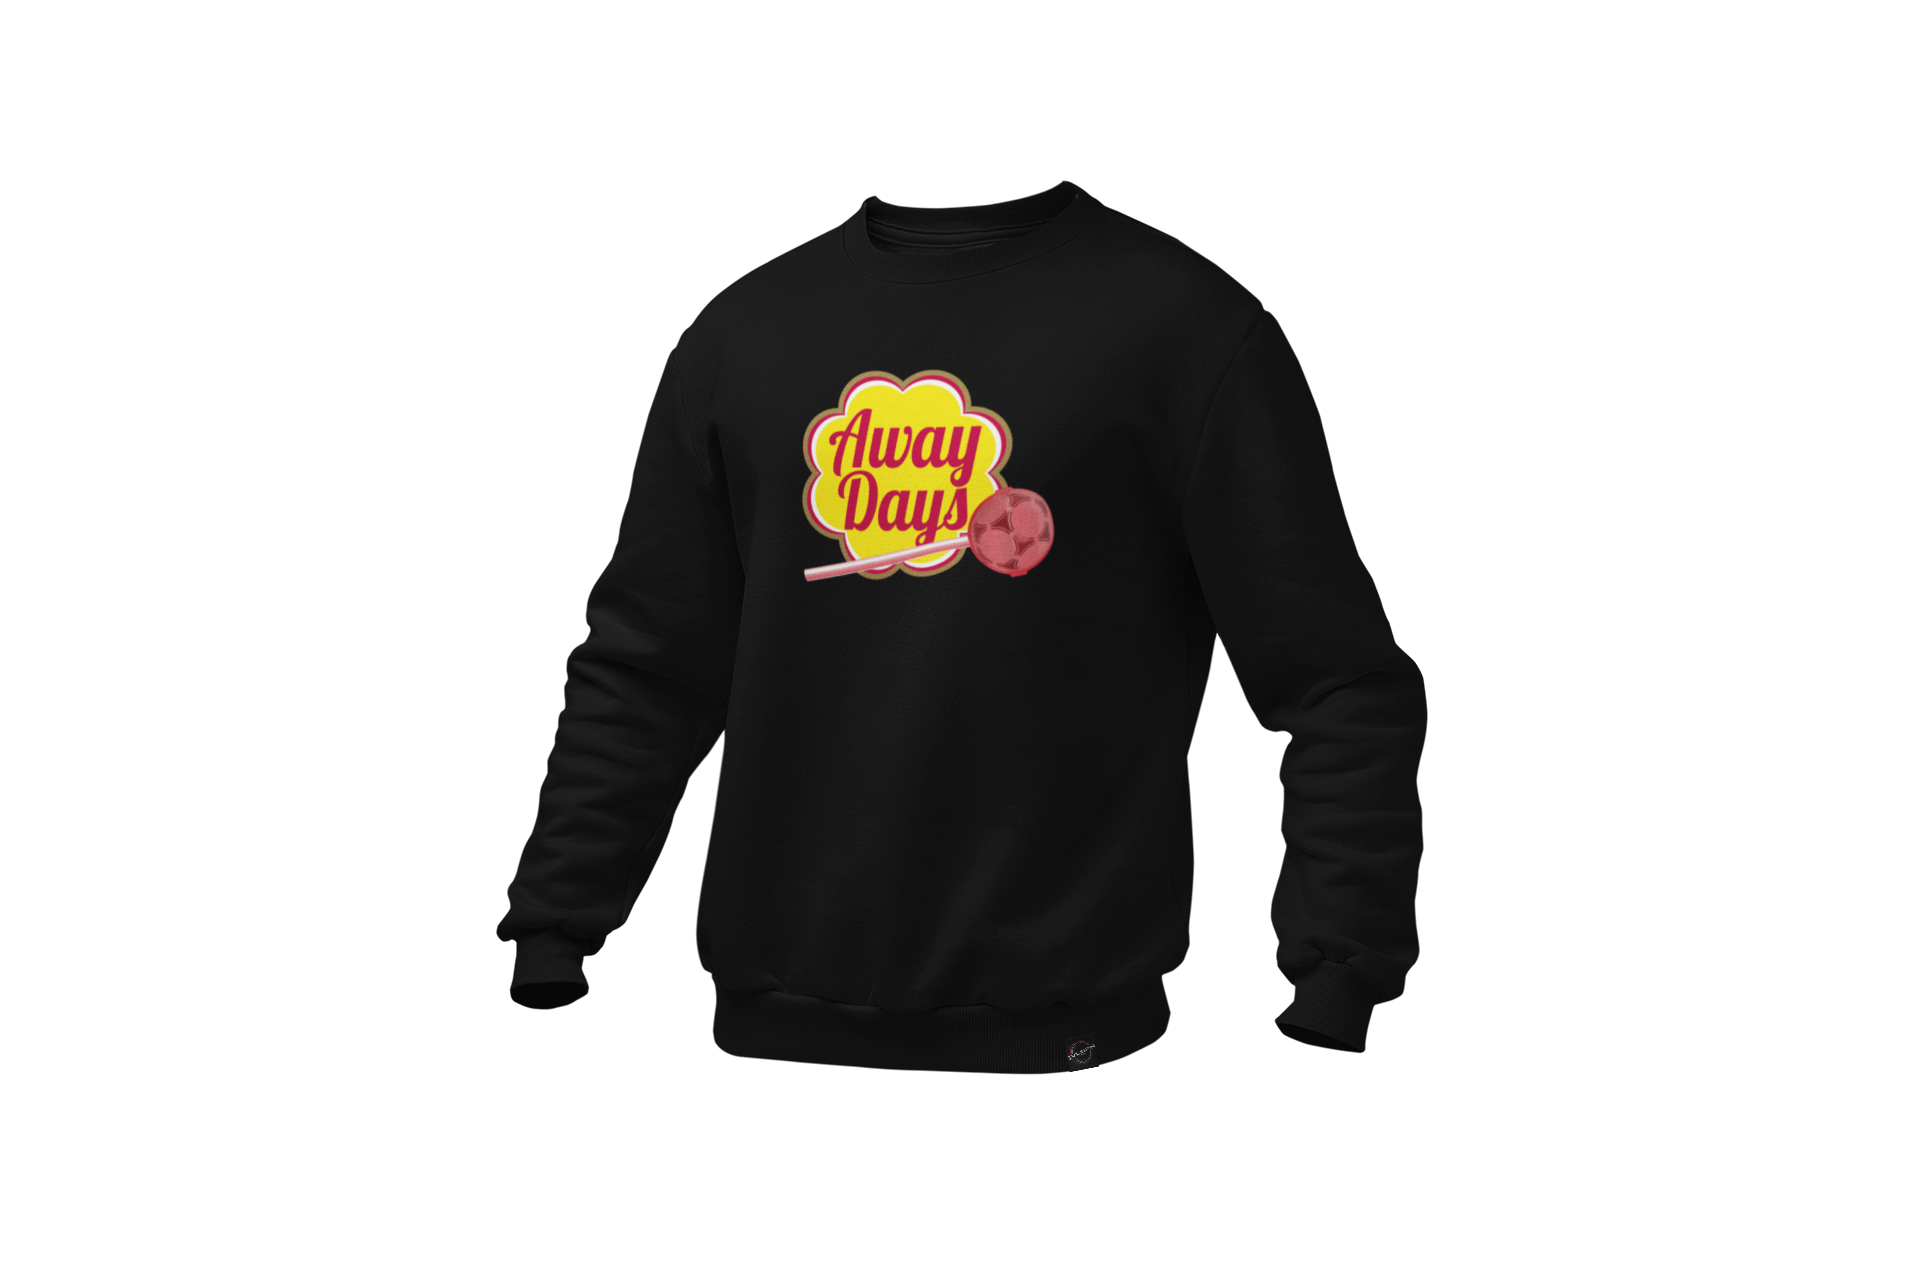 mockup-of-a-ghosted-crewneck-sweatshirt-over-a-solid-background-26960 - 2020-11-06T163751.816.png